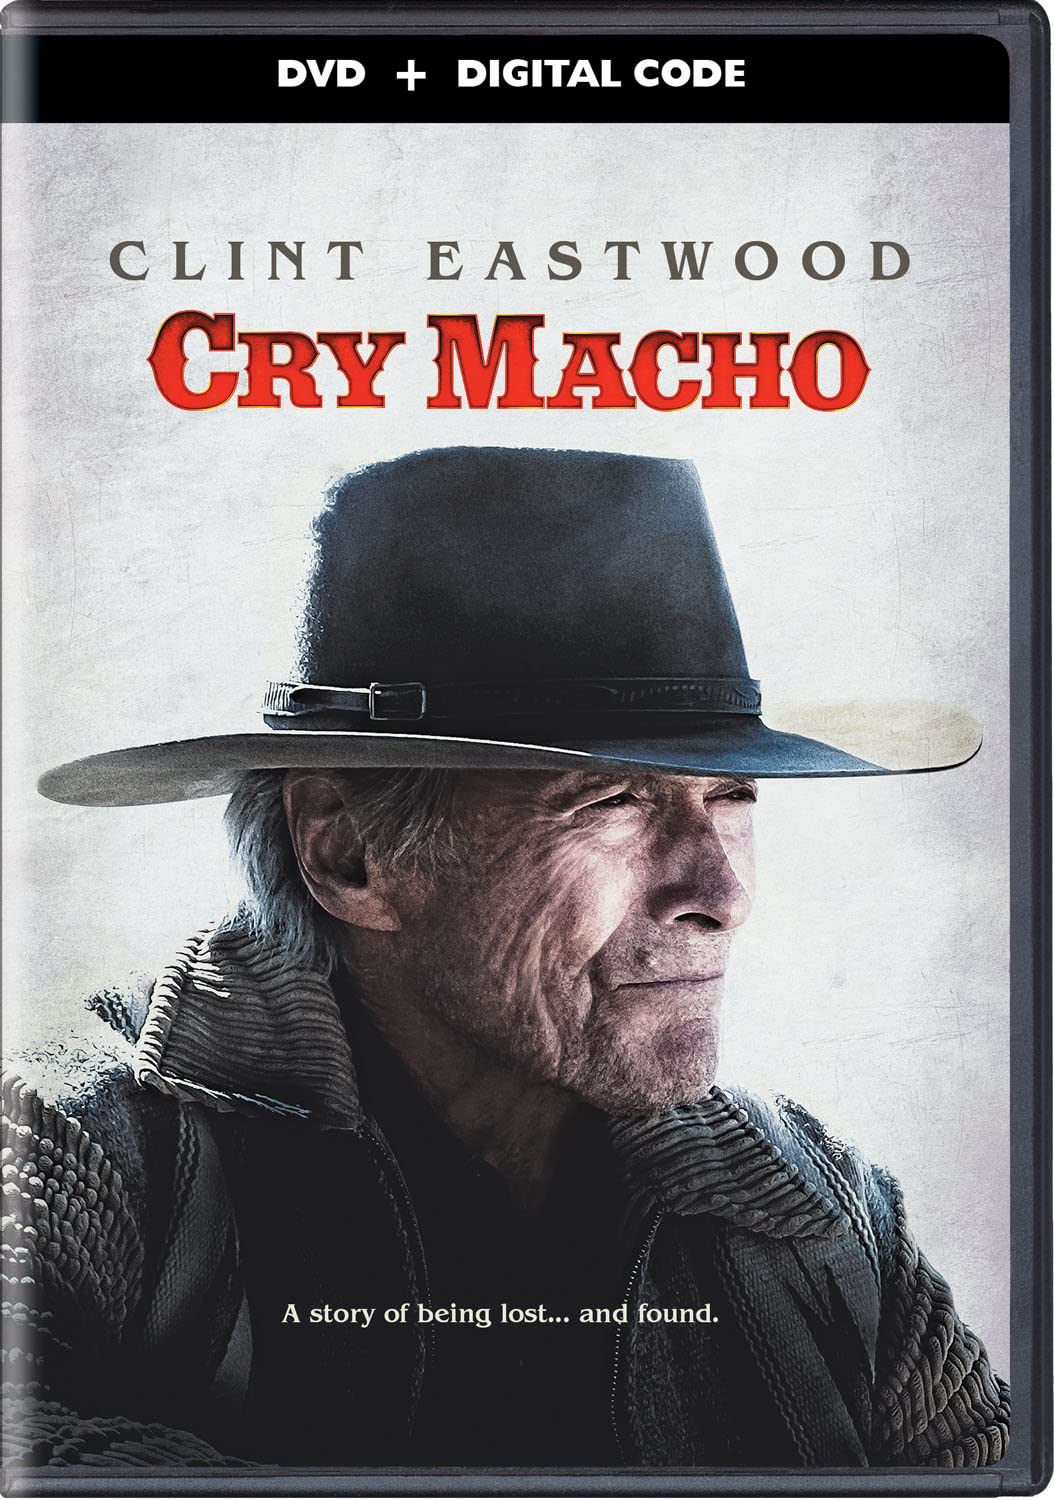 Image for "Cry Macho"